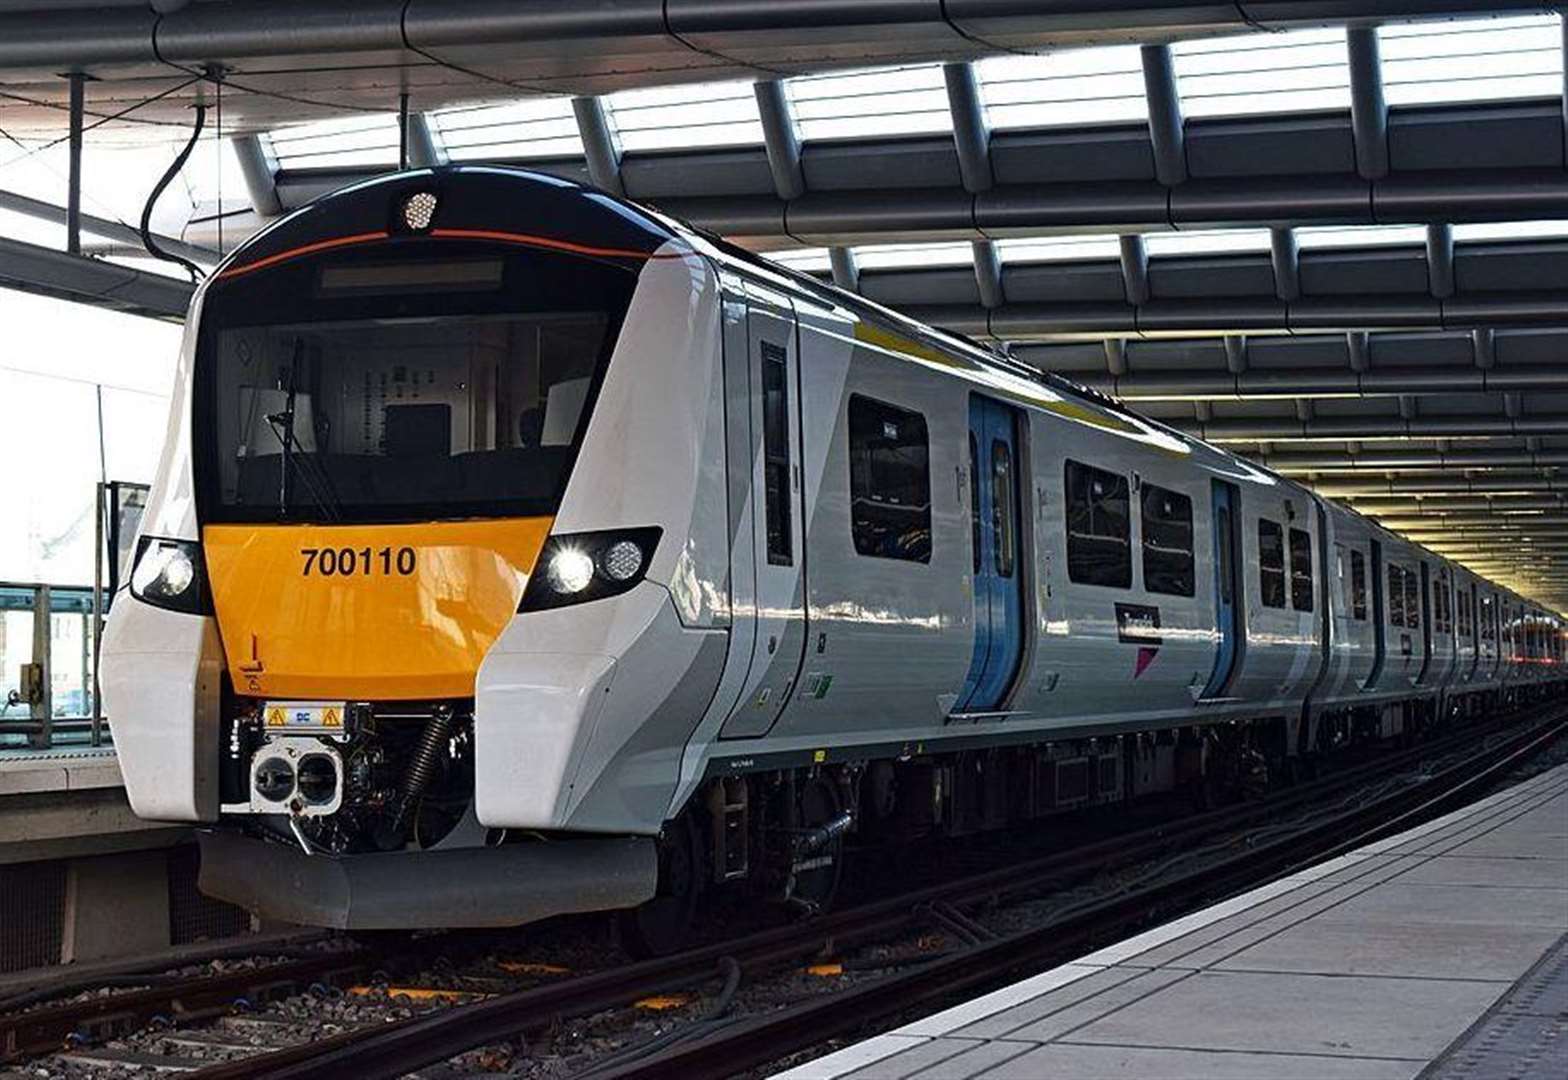 More Trains From Maidstone To London Demanded By Maidstone Borough